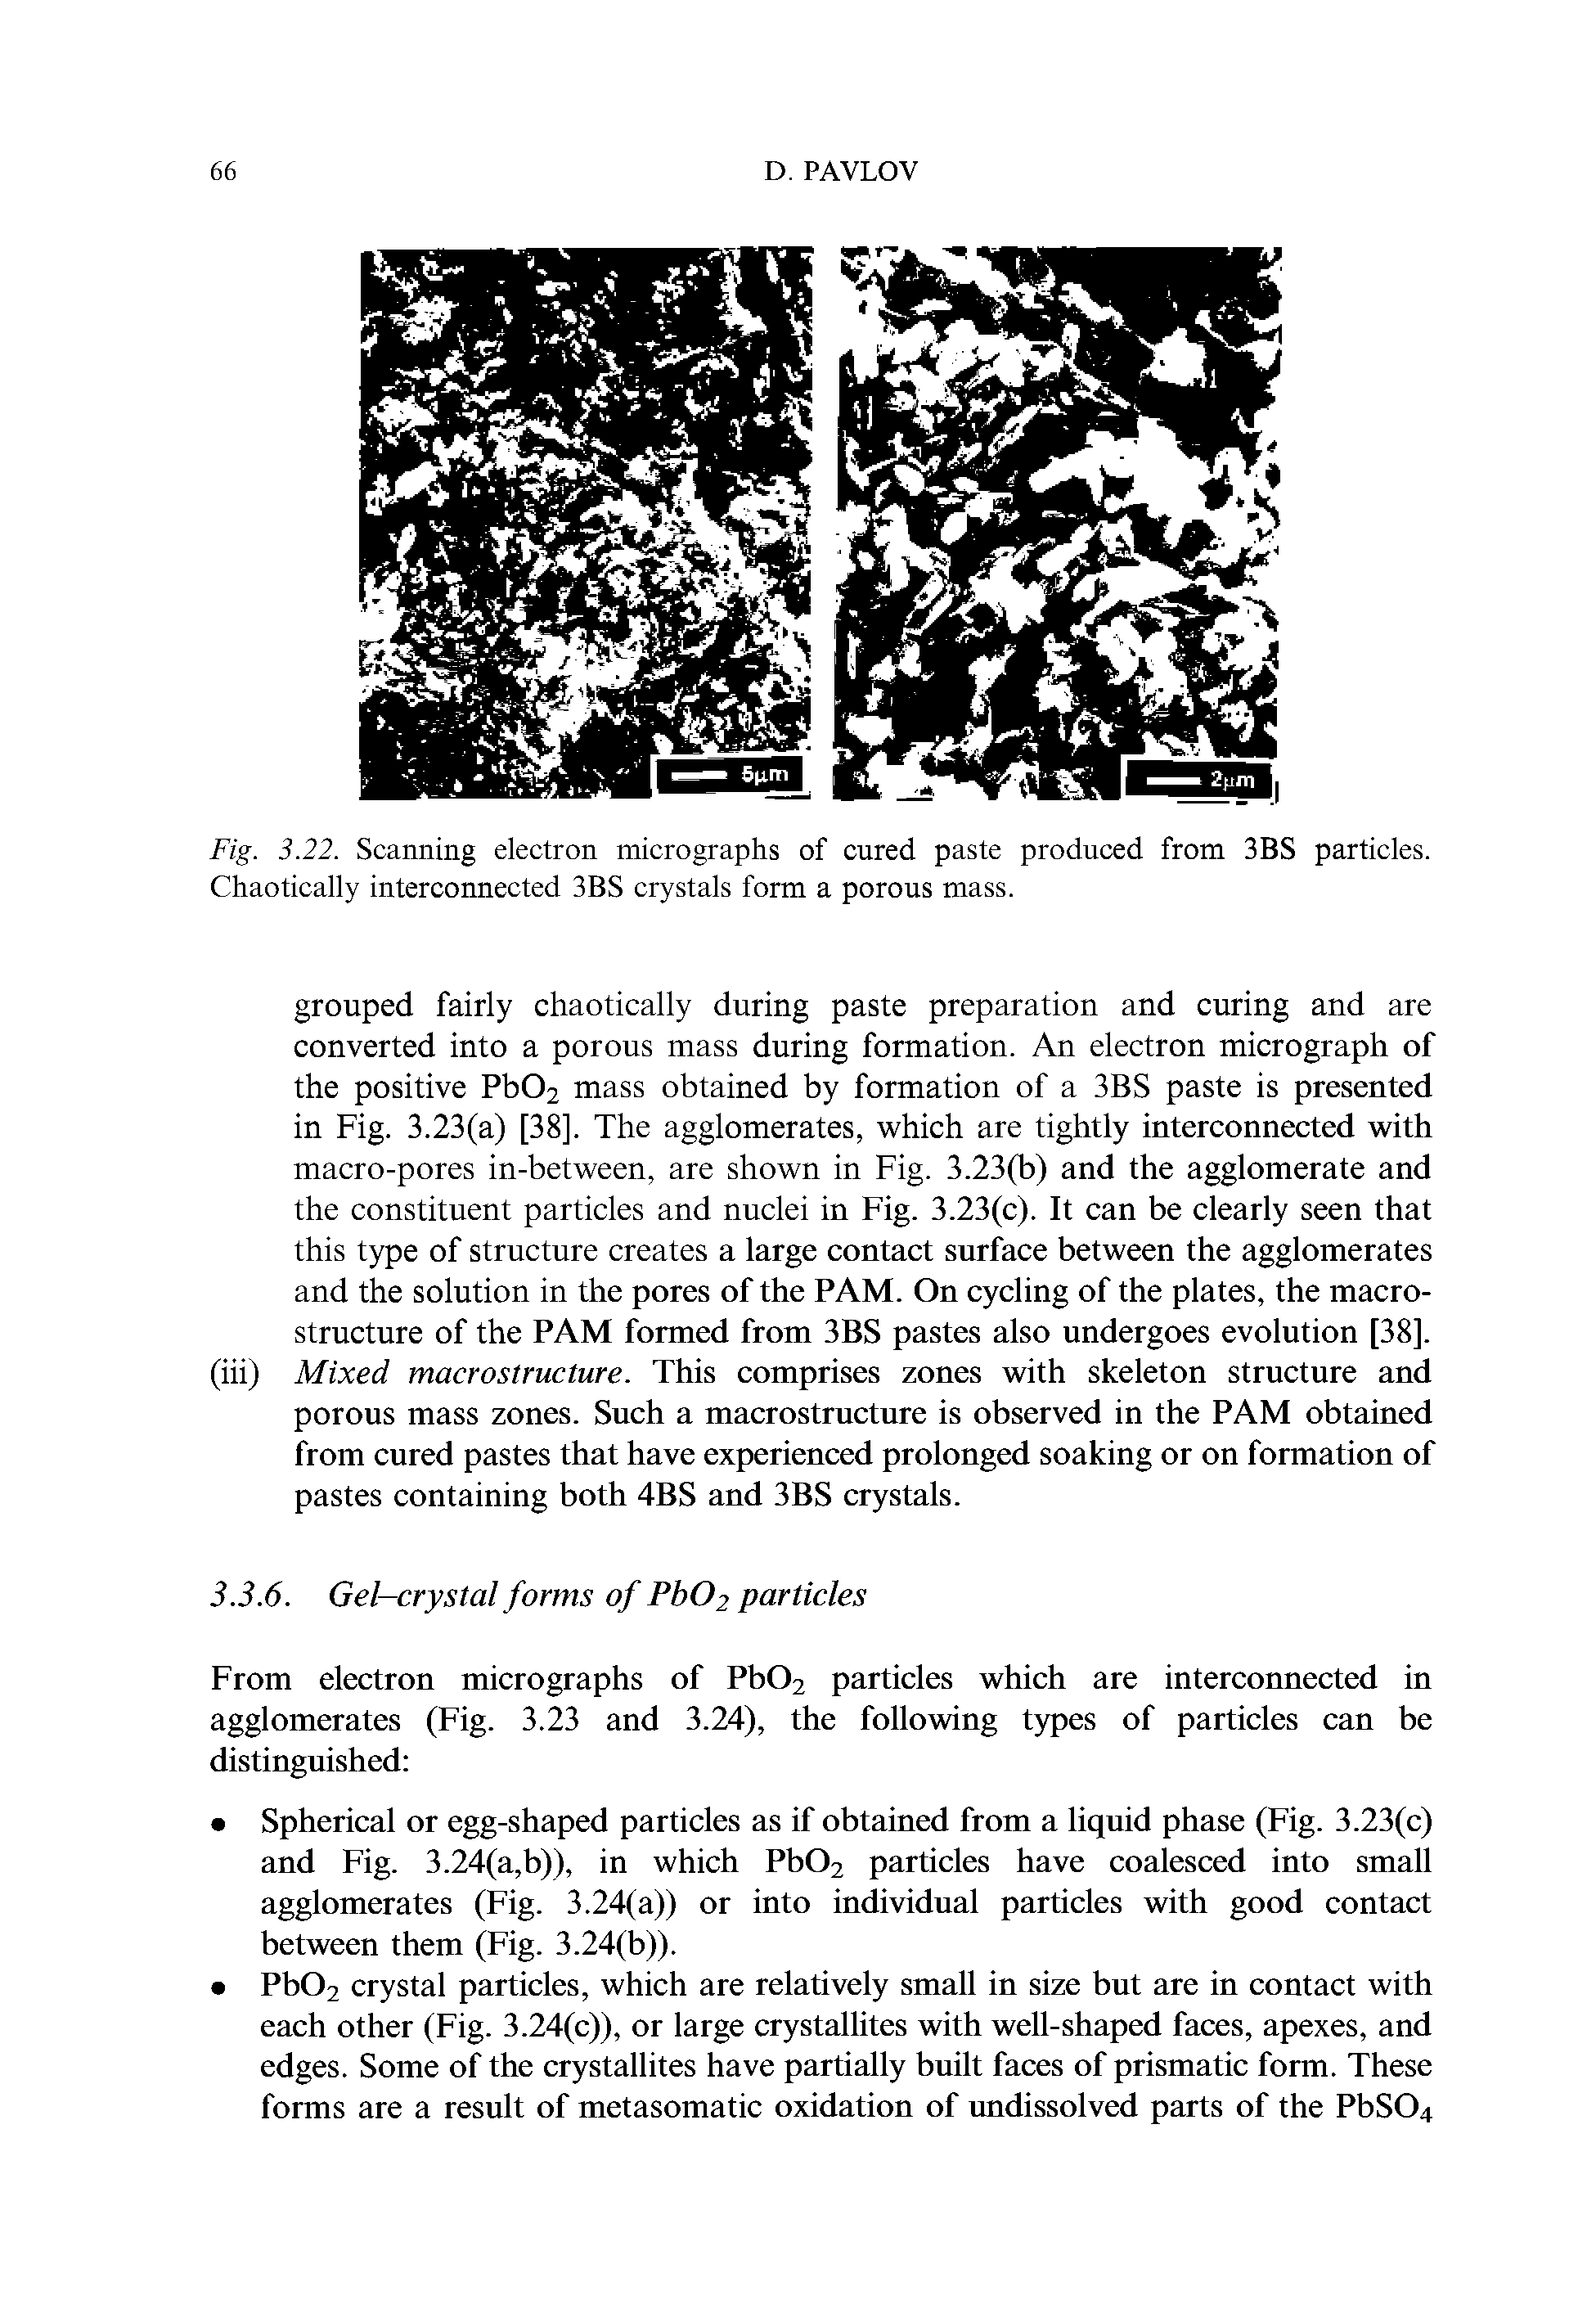 Fig. 3.22. Scanning electron micrographs of cured paste produced from 3BS particles. Chaotically interconnected 3BS crystals form a porous mass.